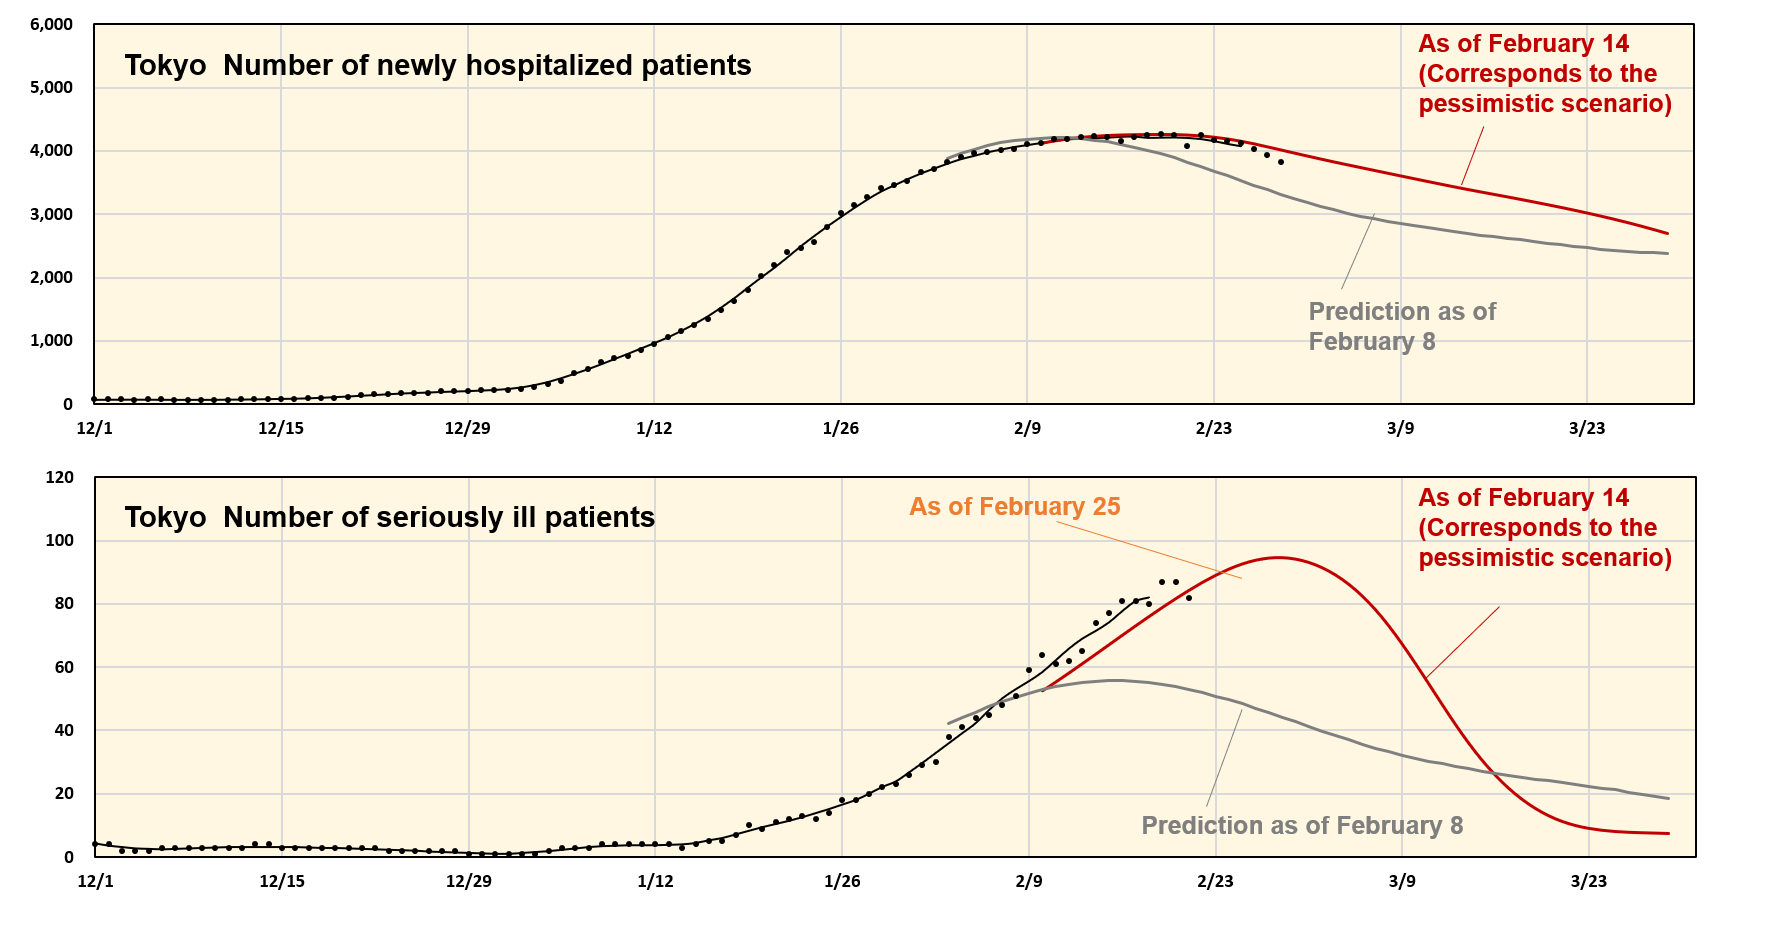 Tokyo: Number of newly hospitalized patients, number of seriously ill patients